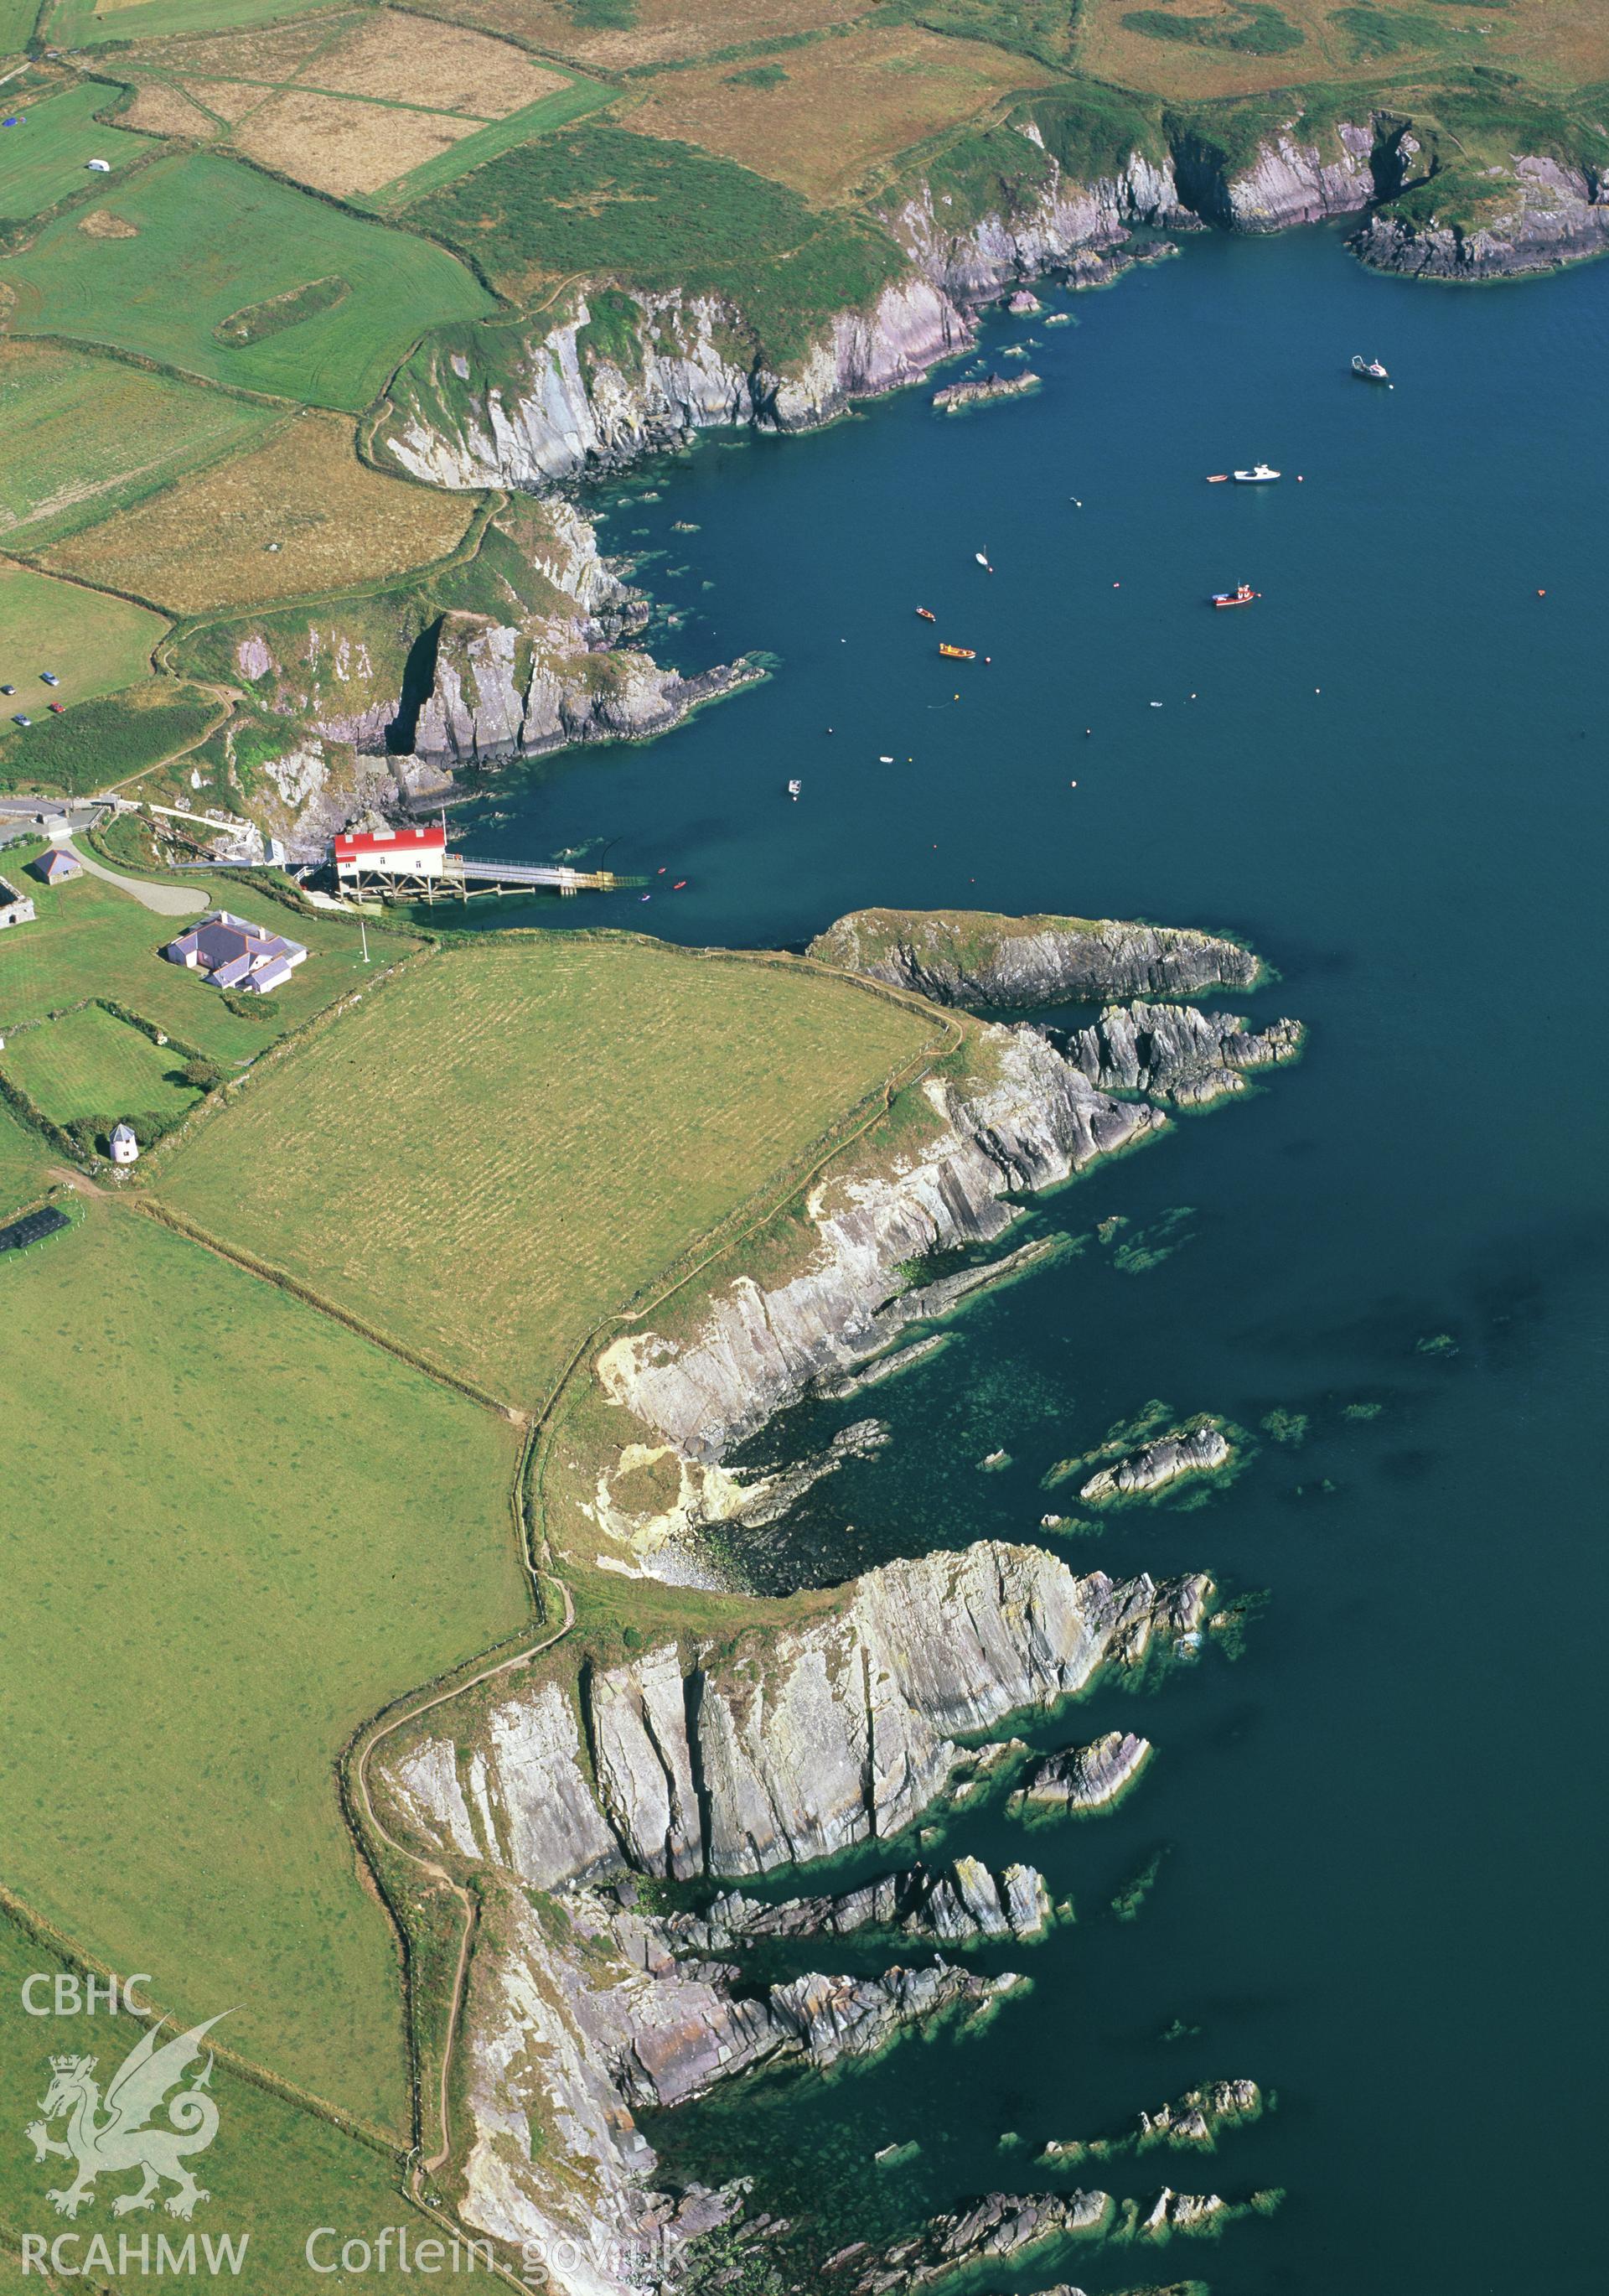 RCAHMW colour oblique aerial photograph of St David's Lifeboat Station and the coastline, taken by Toby Driver, 2002